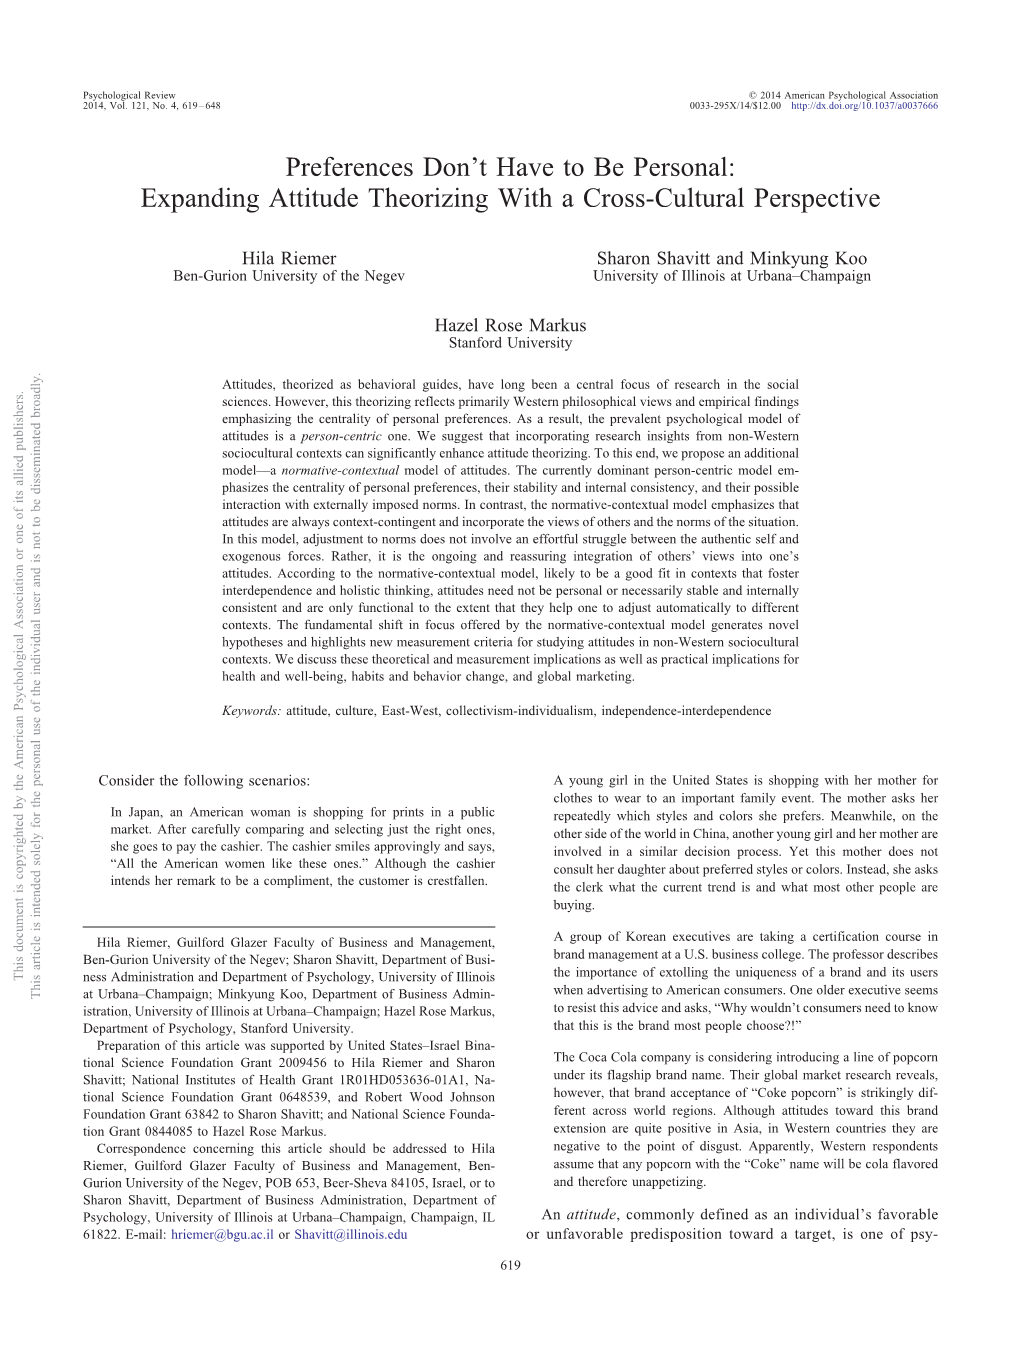 Expanding Attitude Theorizing with a Cross-Cultural Perspective